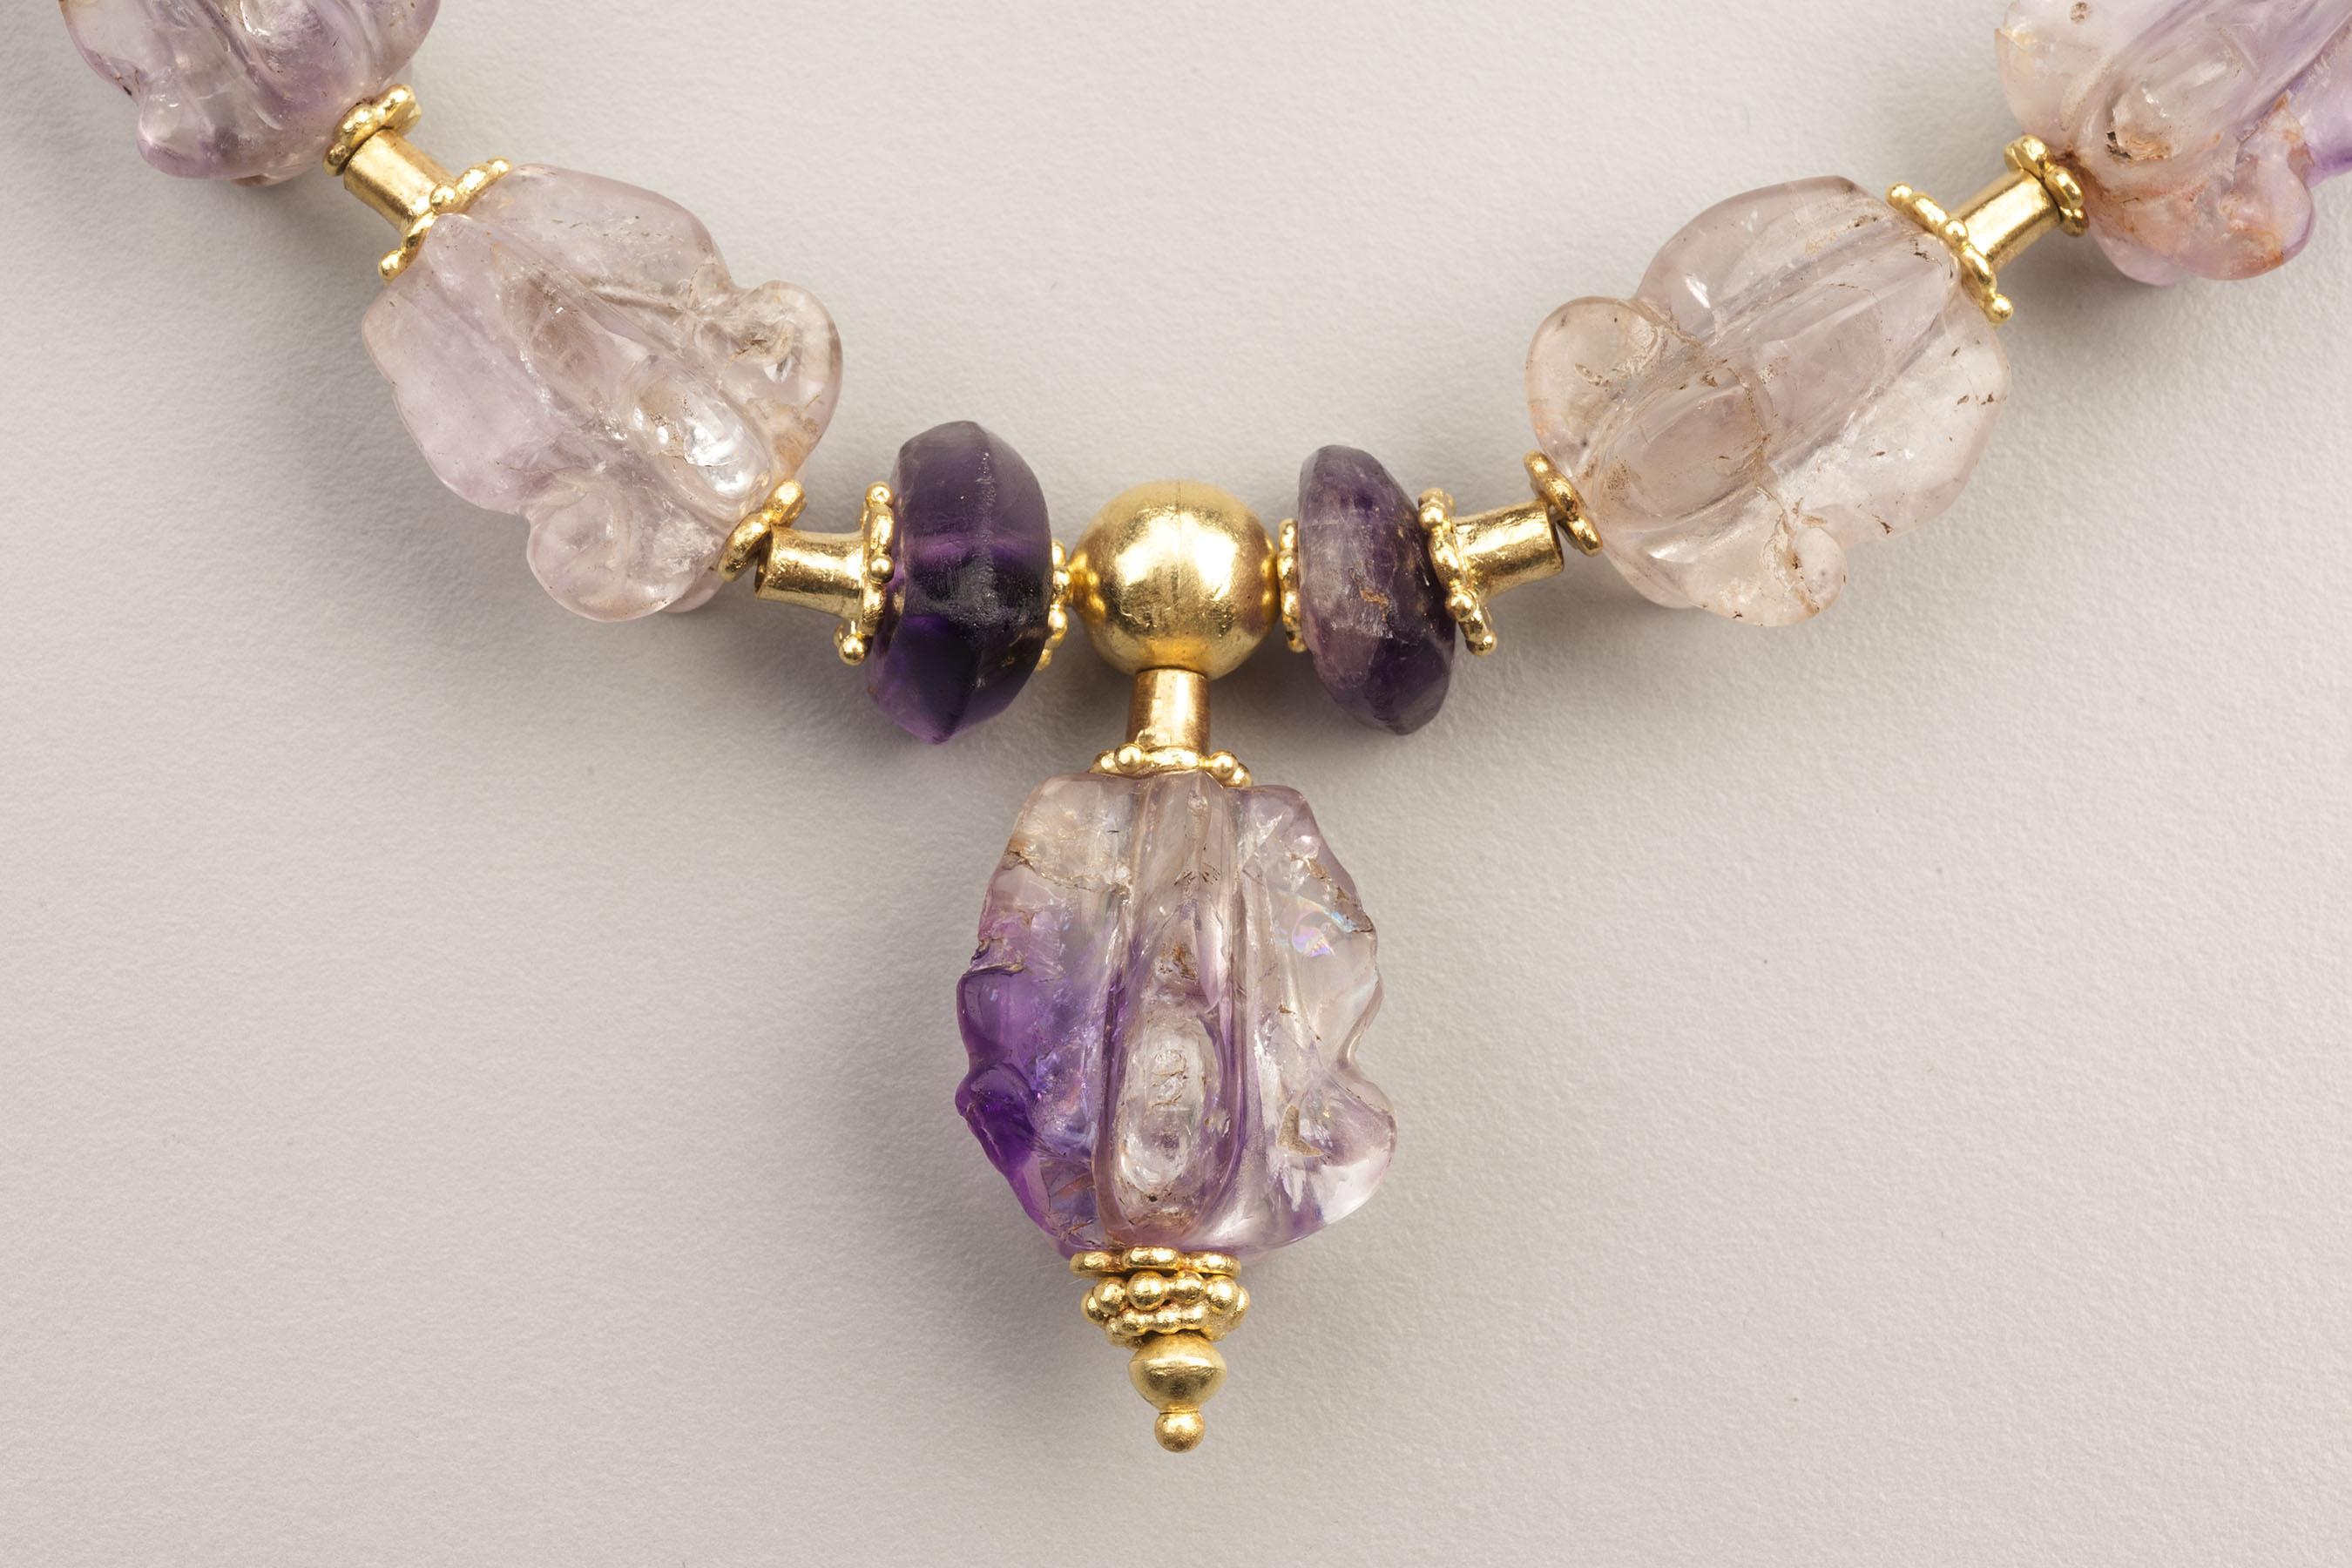 Ancient Carved Amethyst Crown Flower Bead Necklace with 22k Gold For ...